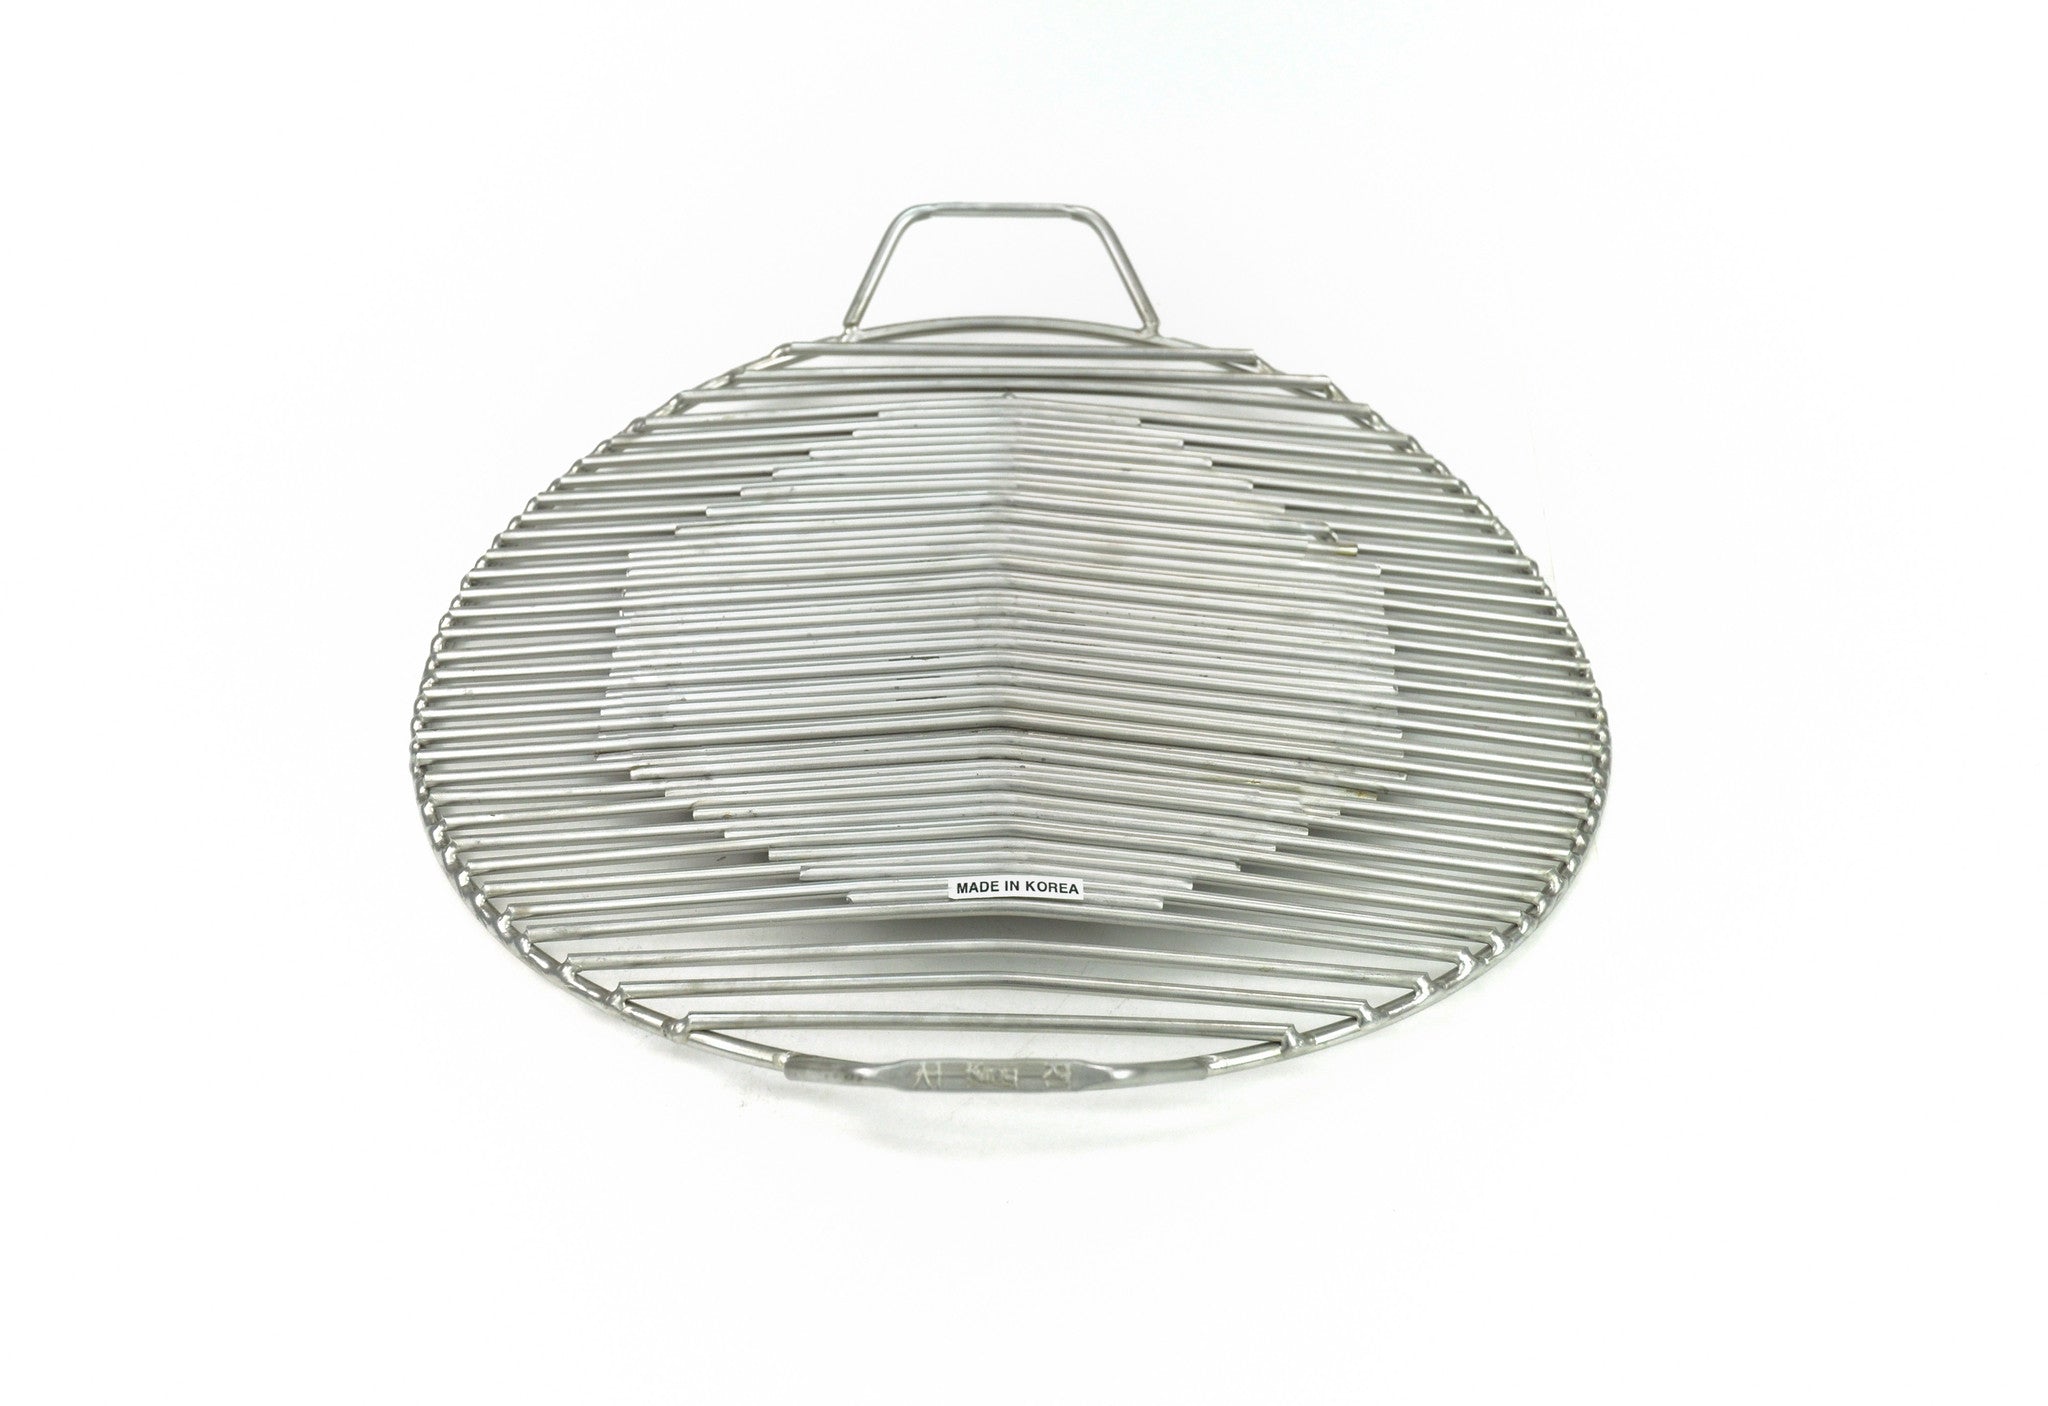 Stainless Steel Korean Bbq Grate with Handles, Stainless Steel - eKitchenary